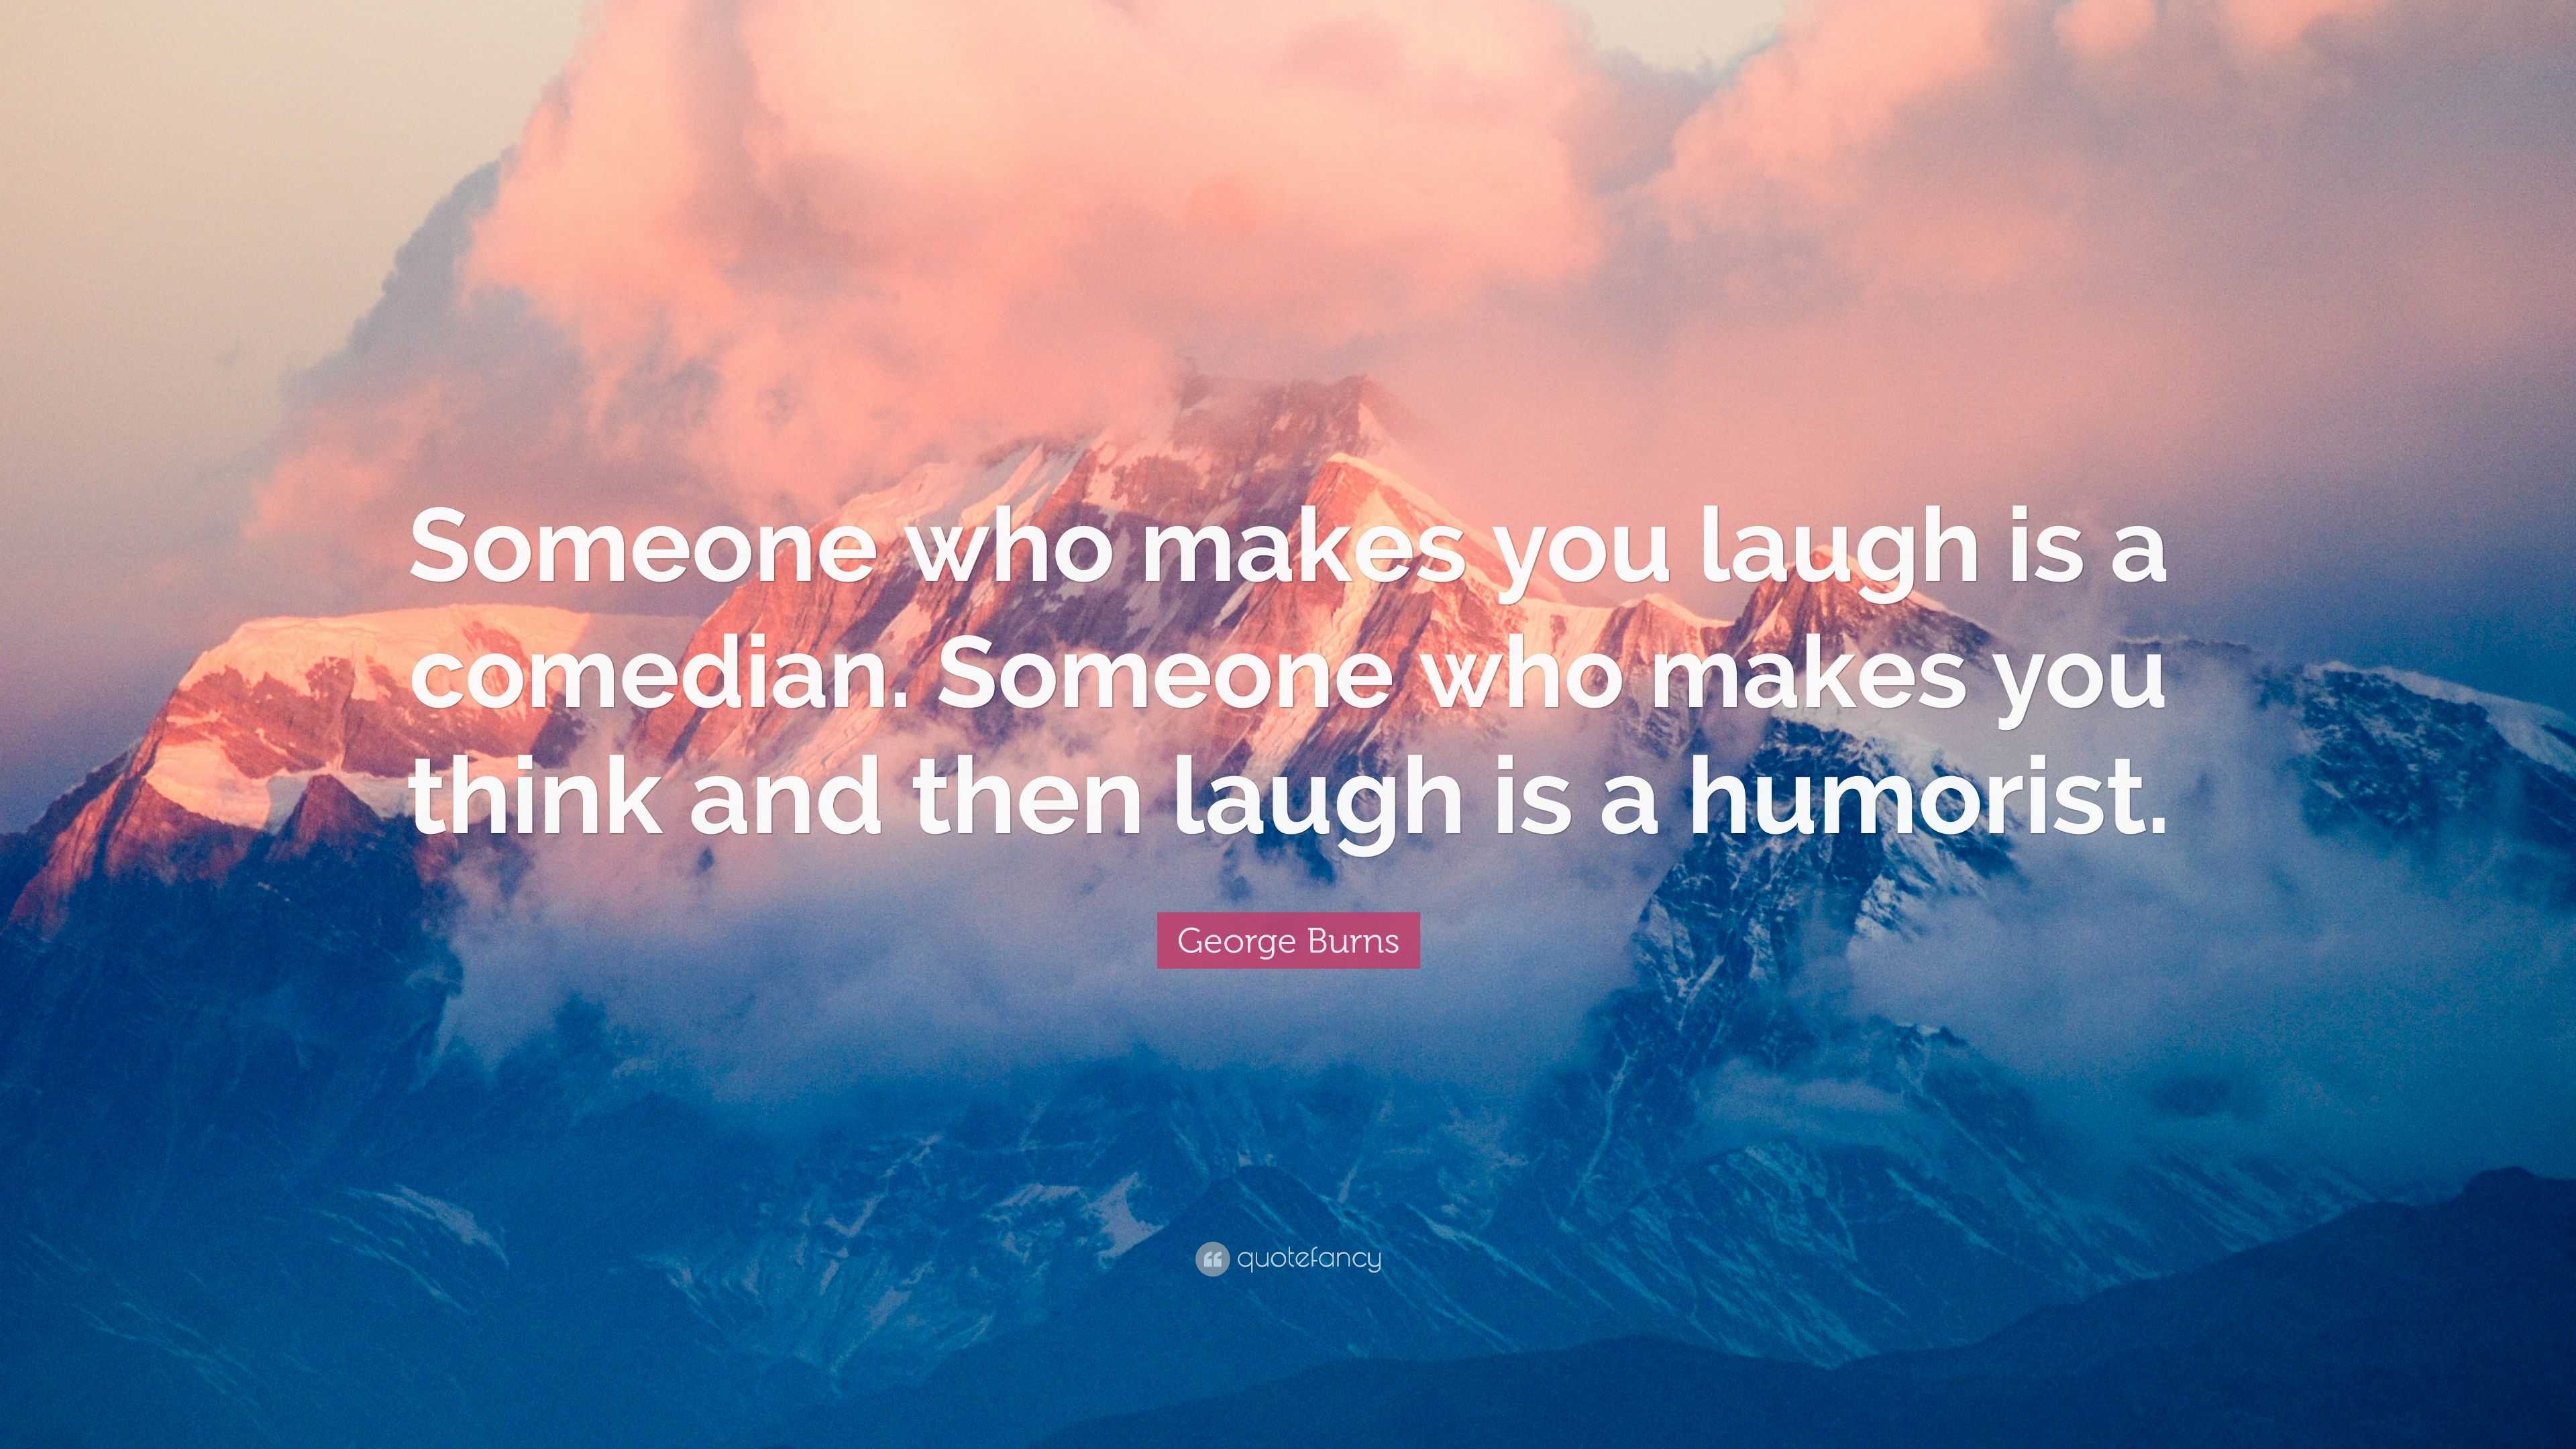 George Burns Quote “someone Who Makes You Laugh Is A Comedian Someone Who Makes You Think And